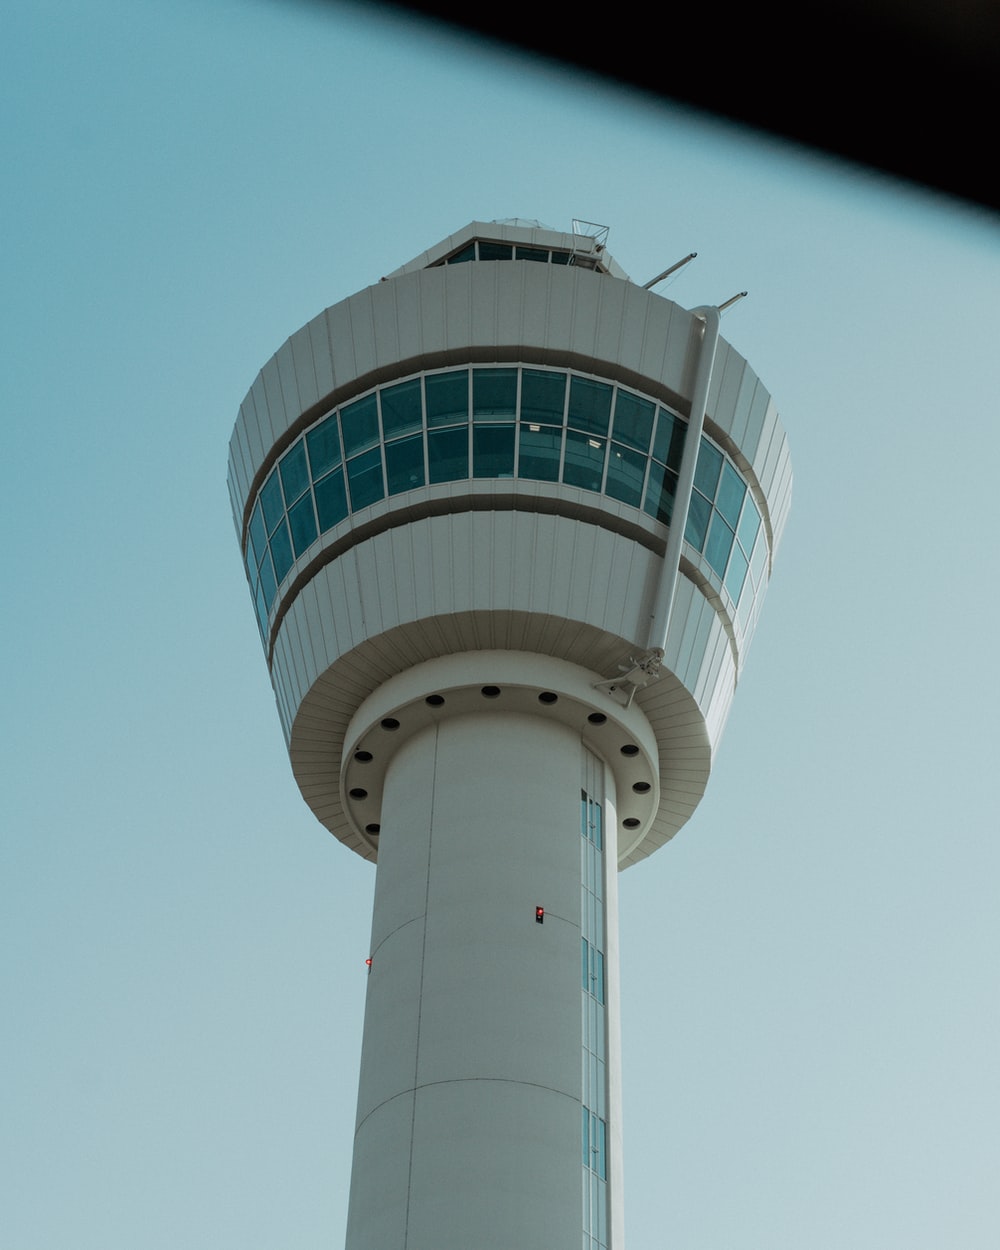 Air Traffic Control Tower Picture. Download Free Image